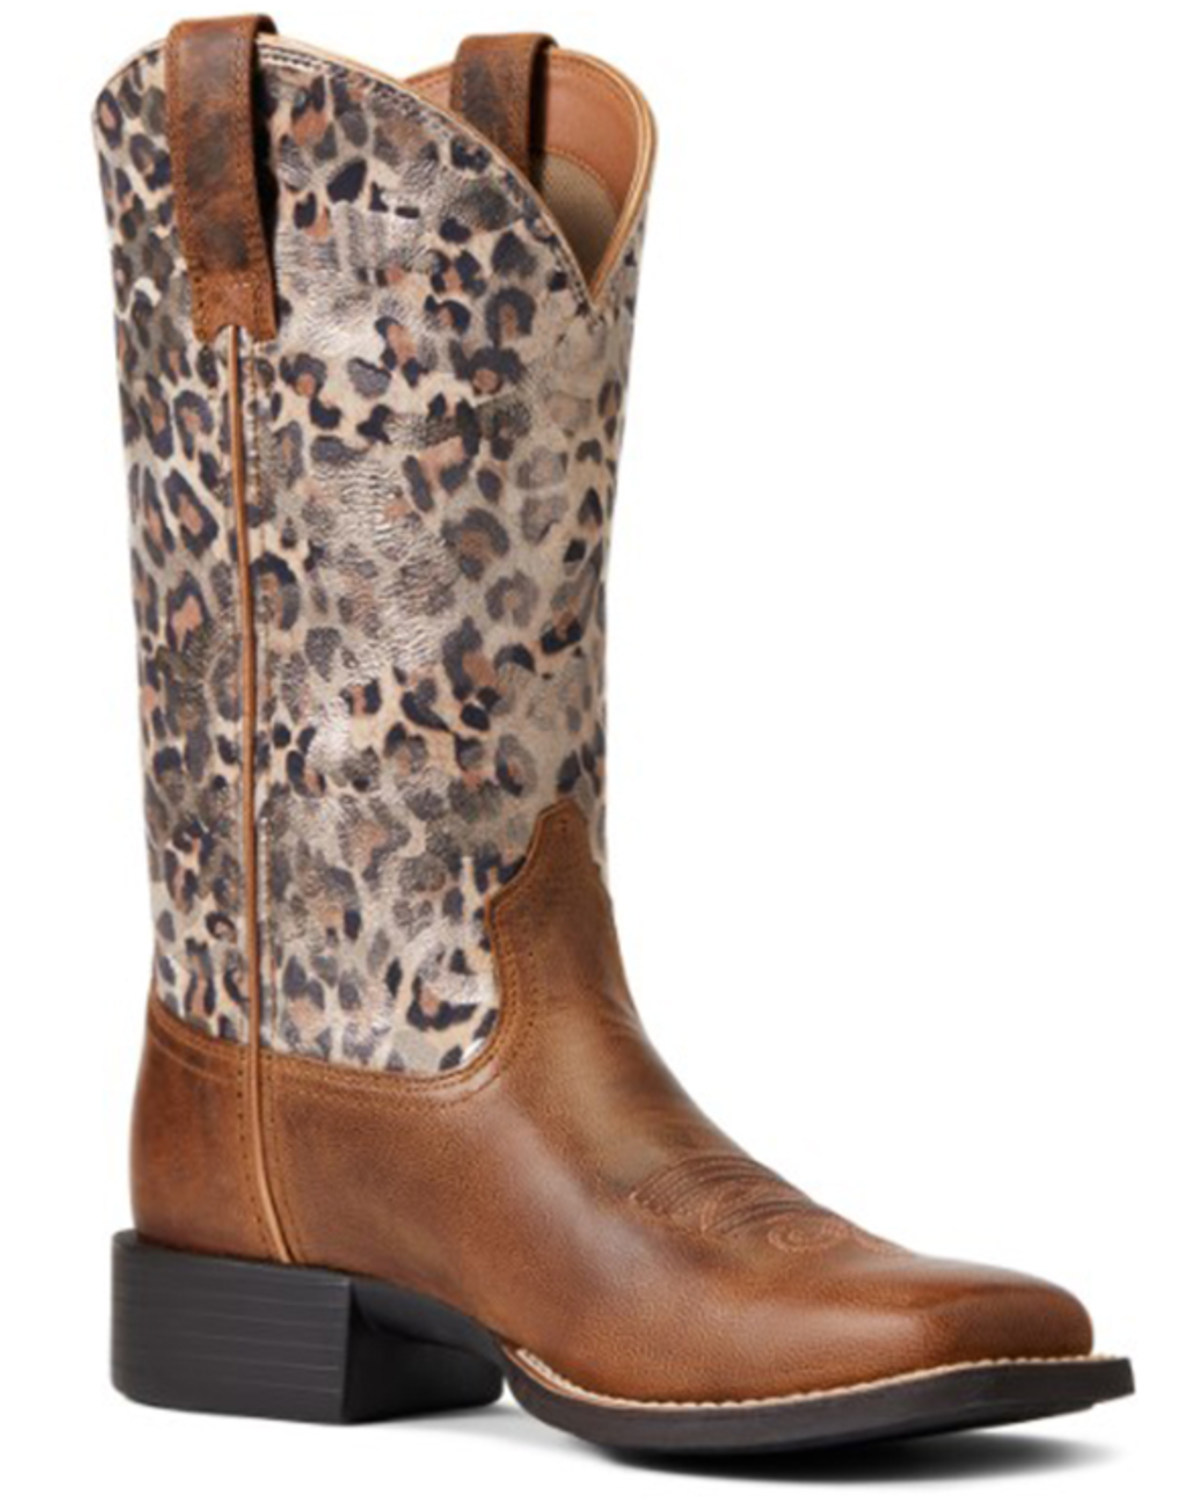 Ariat Women's Round Up Leopard Print Western Performance Boots - Broad Square Toe